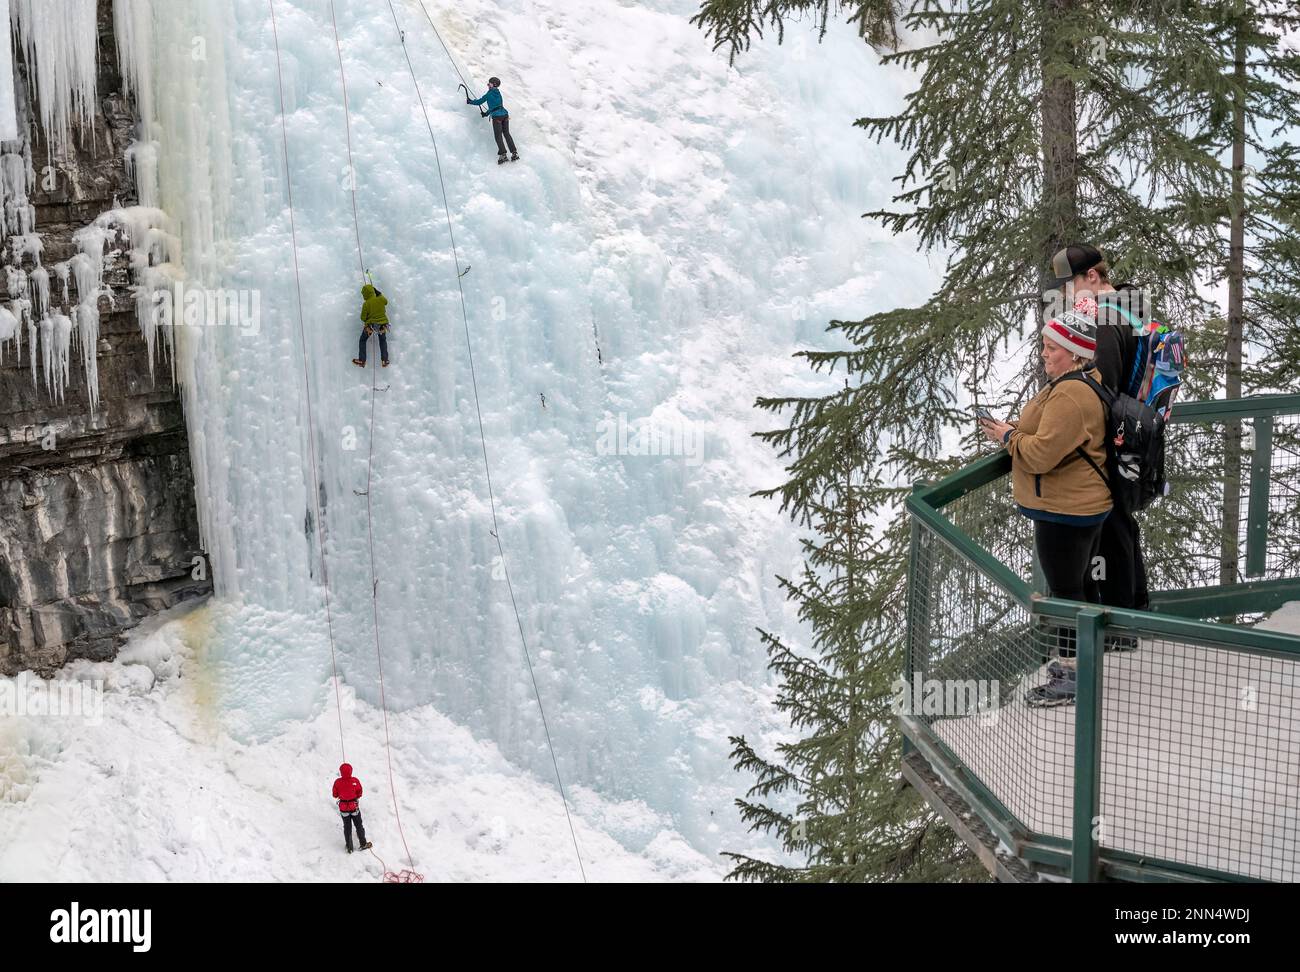 Banff National Park, Alberta, Canada – February 12, 2023:  People on an observation deck watch ice climbers on a frozen waterfall in Johnston Canyon Stock Photo